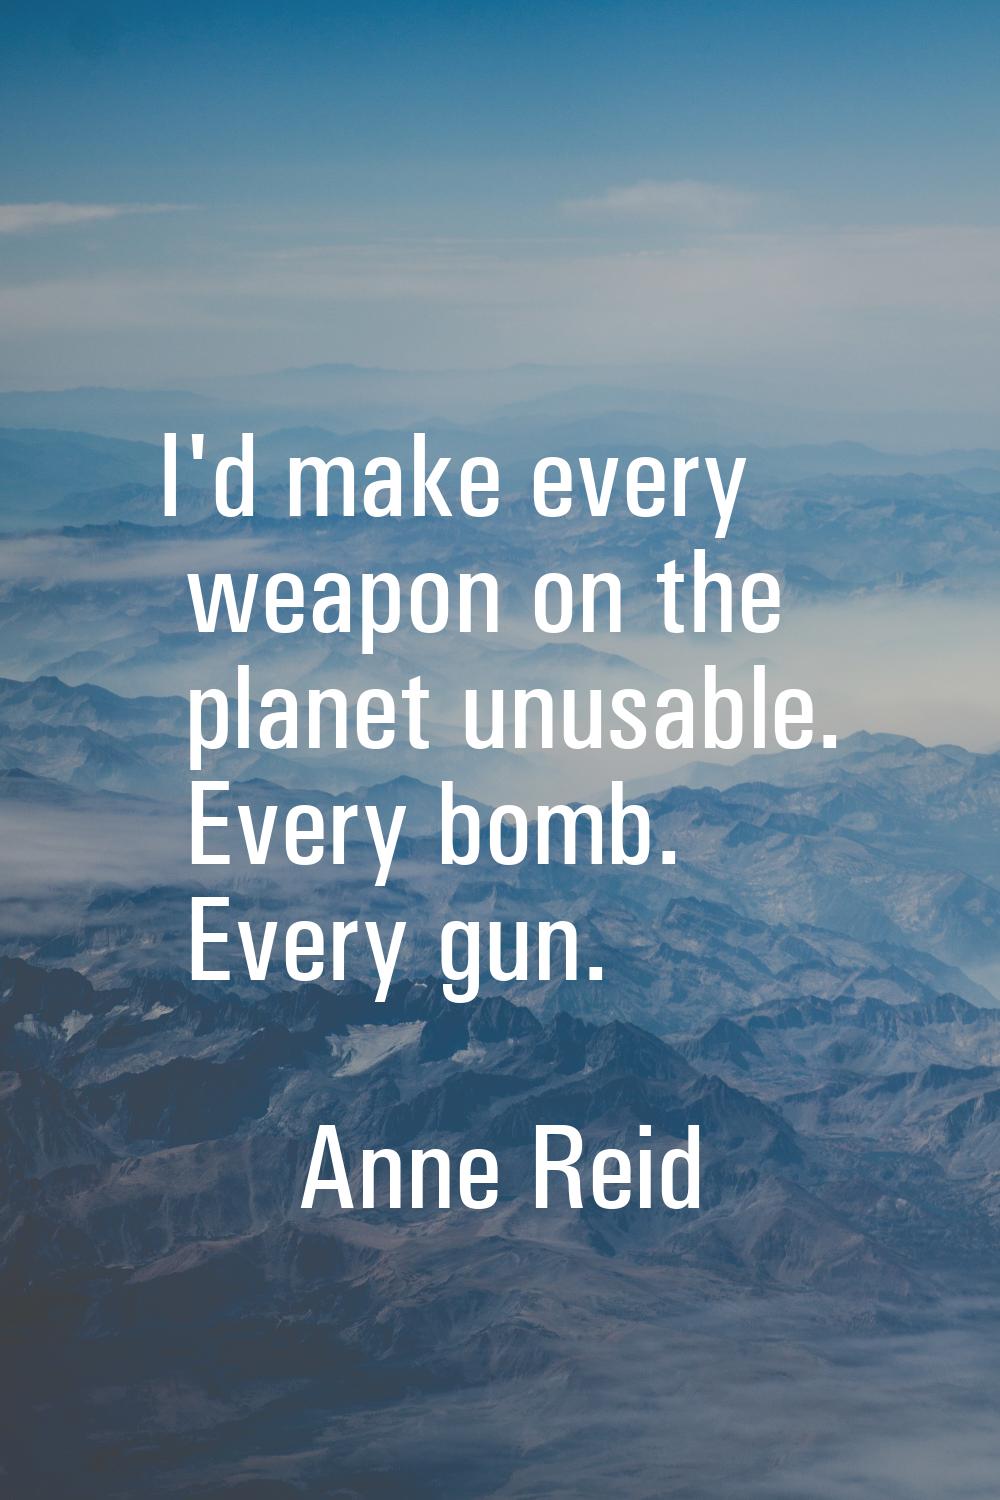 I'd make every weapon on the planet unusable. Every bomb. Every gun.